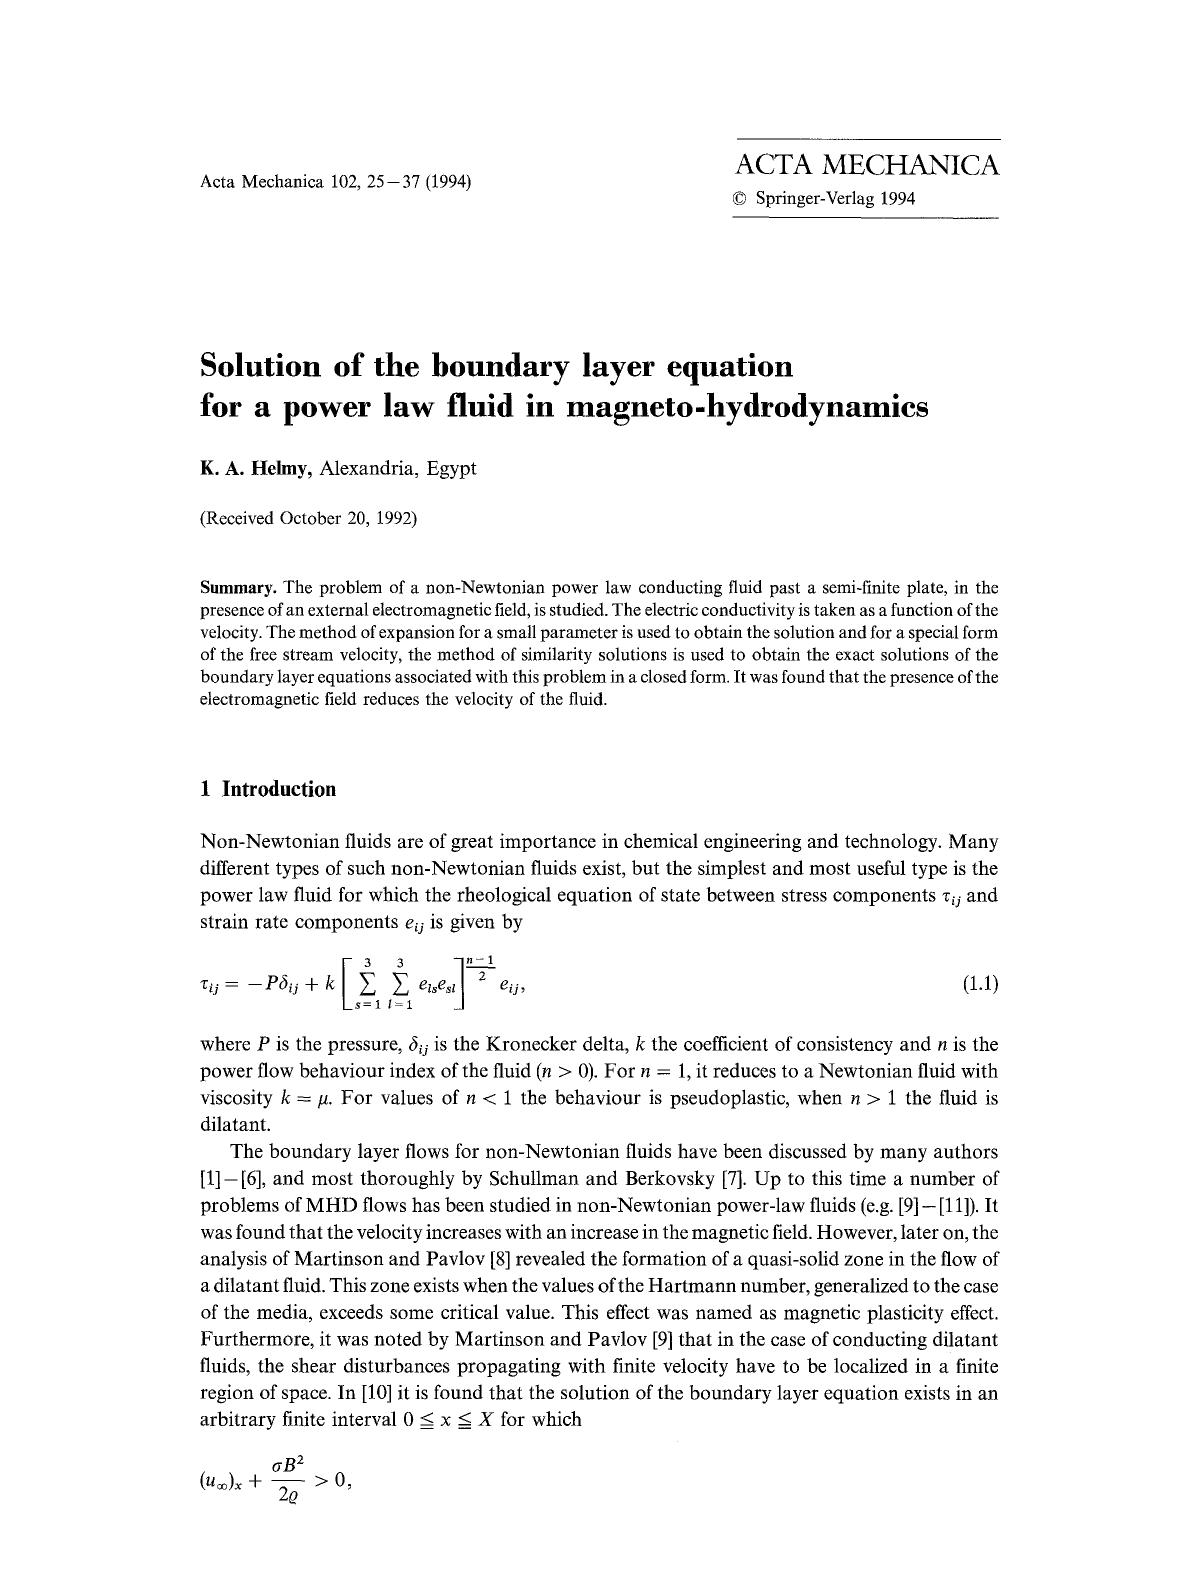 Solution of the boundary layer equation for a power law fluid in magneto-hydrodynamics by Unknown